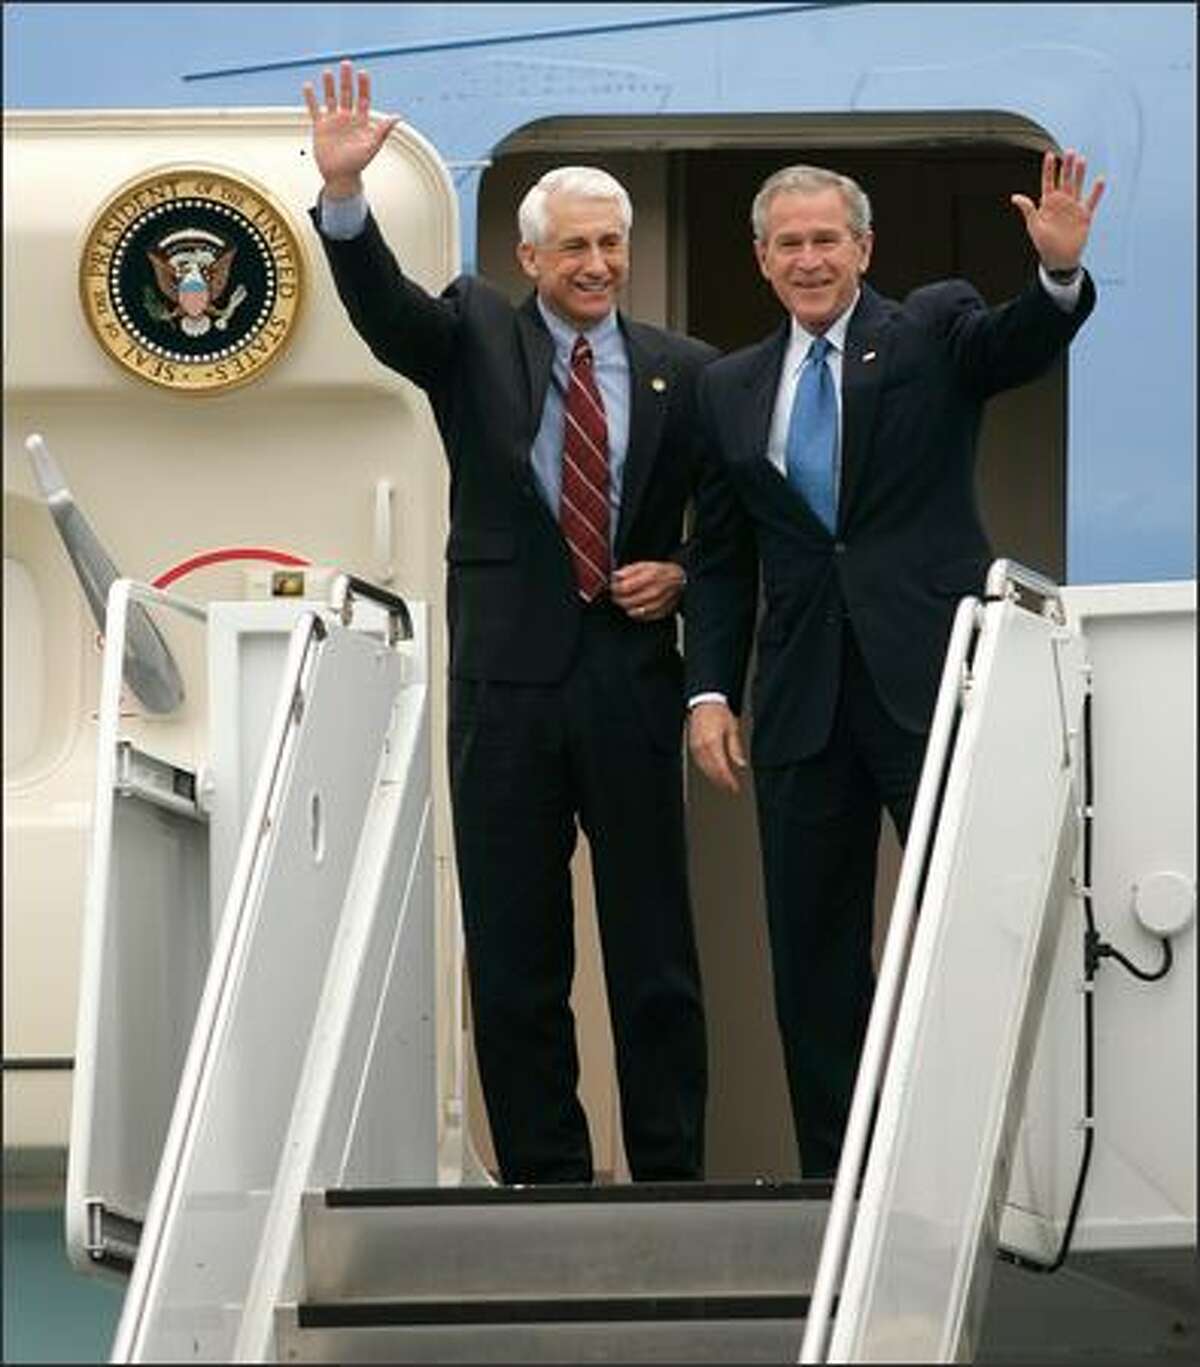 President Bush greets the crowd as he emerges from Air Force One with Rep. Dave Reichert.